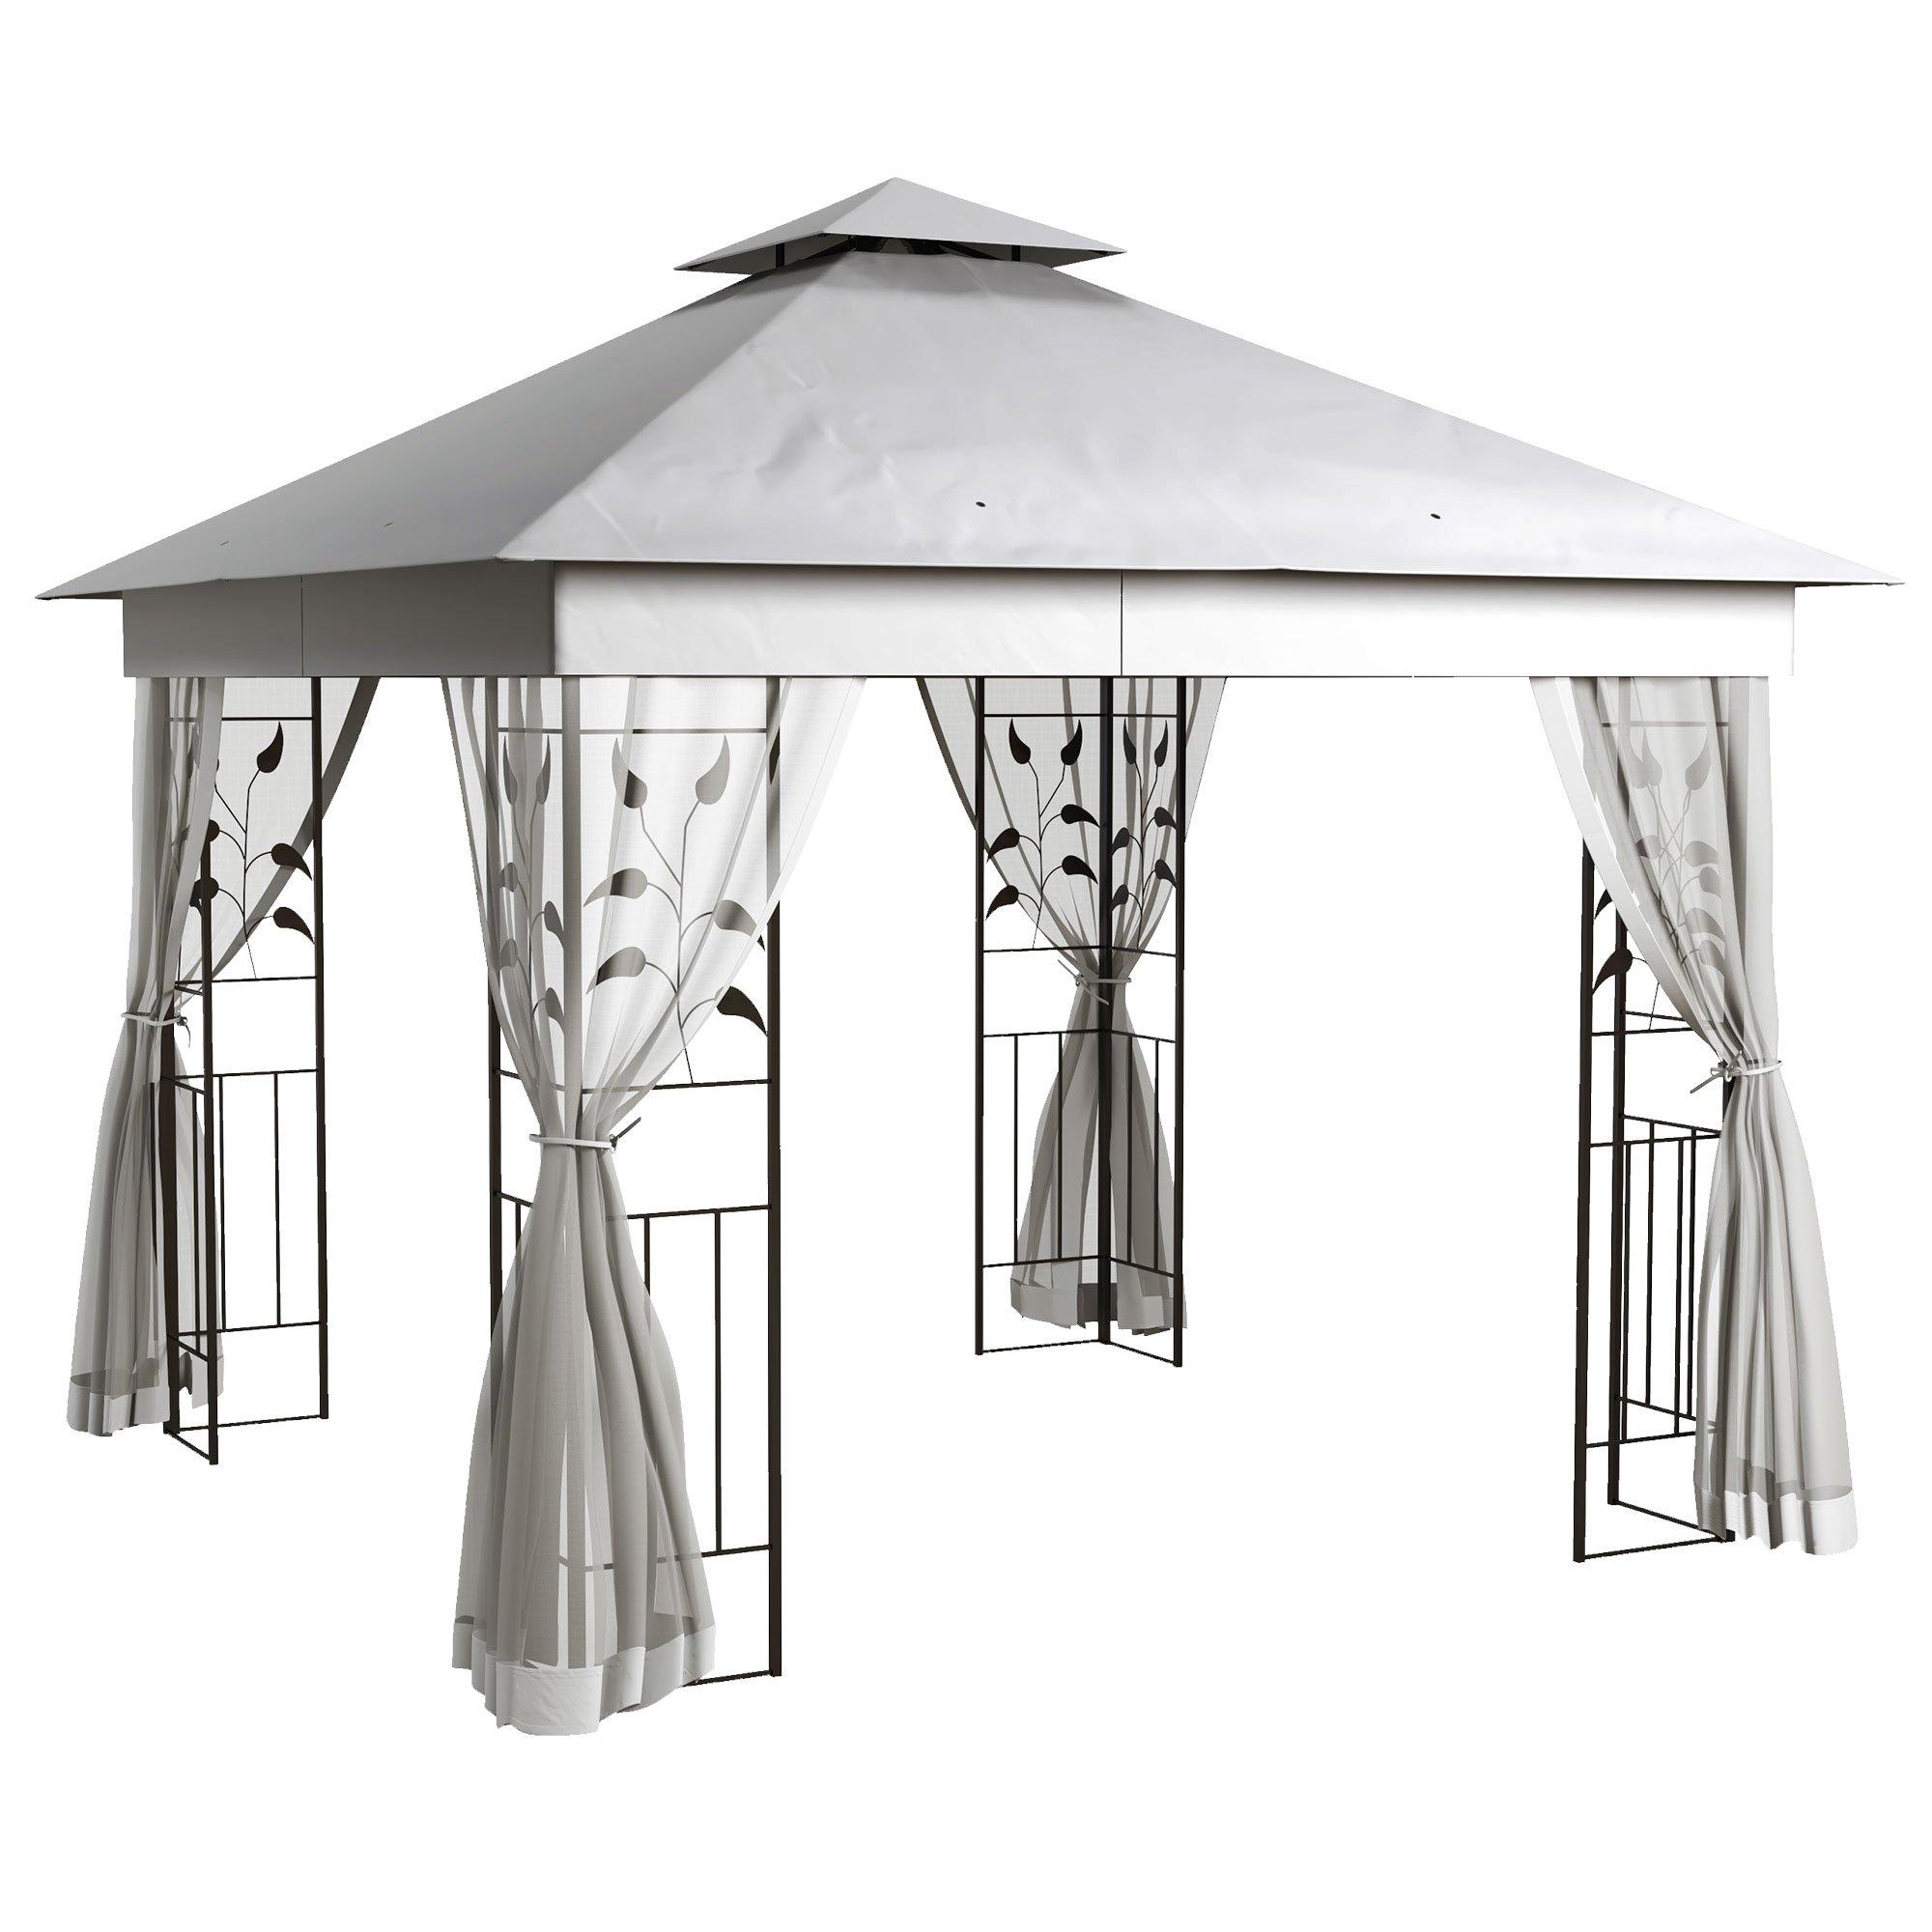 3(m) x 3(m) Patio Garden Metal Gazebo Marquee Party Tent Canopy Shelter Pavilion